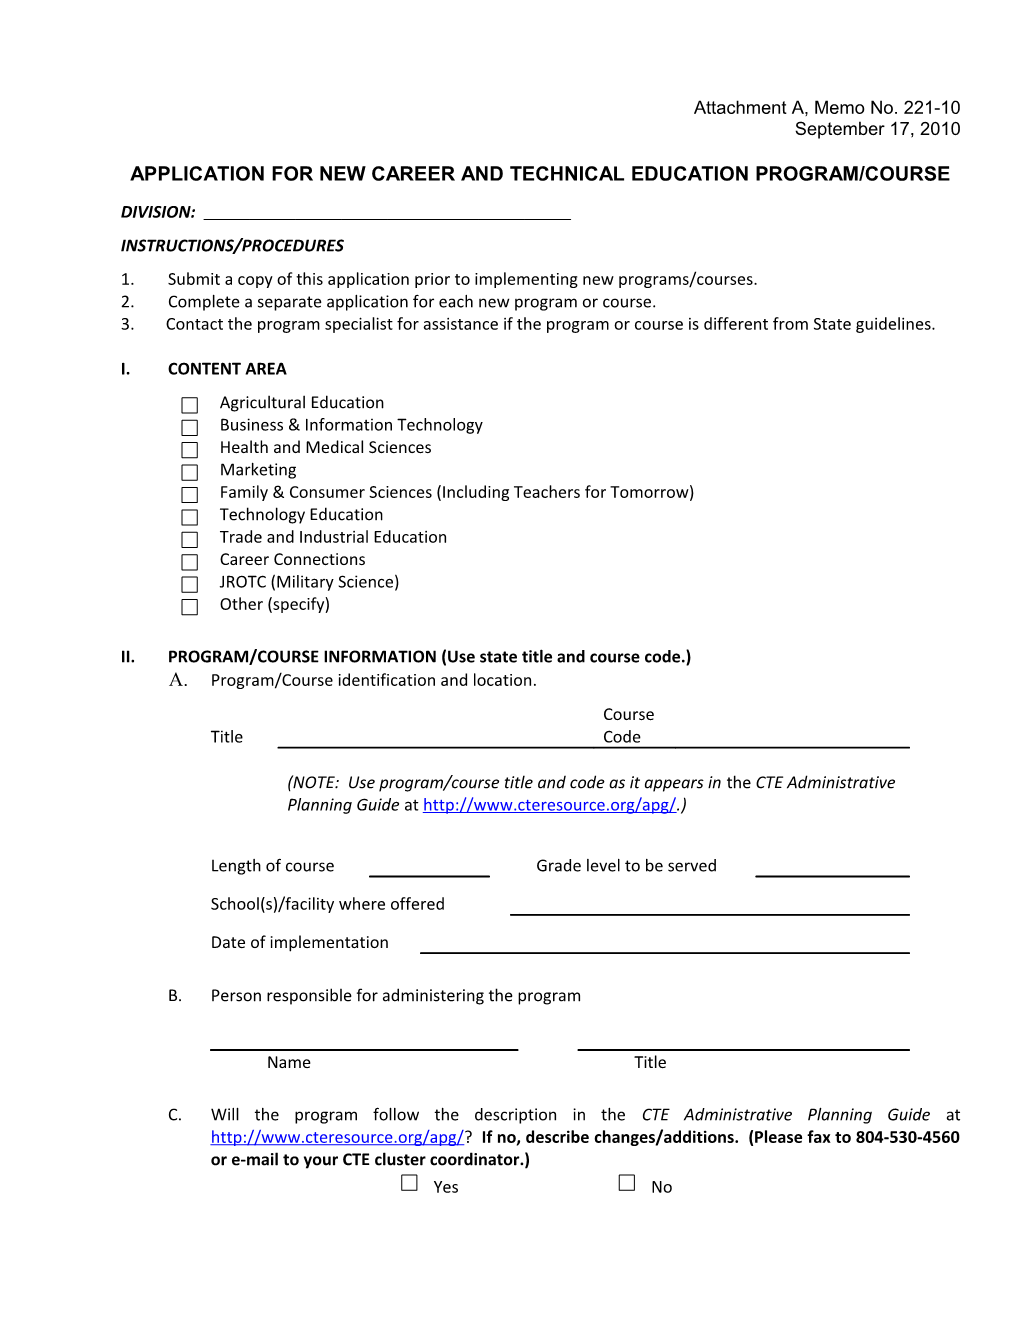 Application for New Career and Technical Education Program/Course